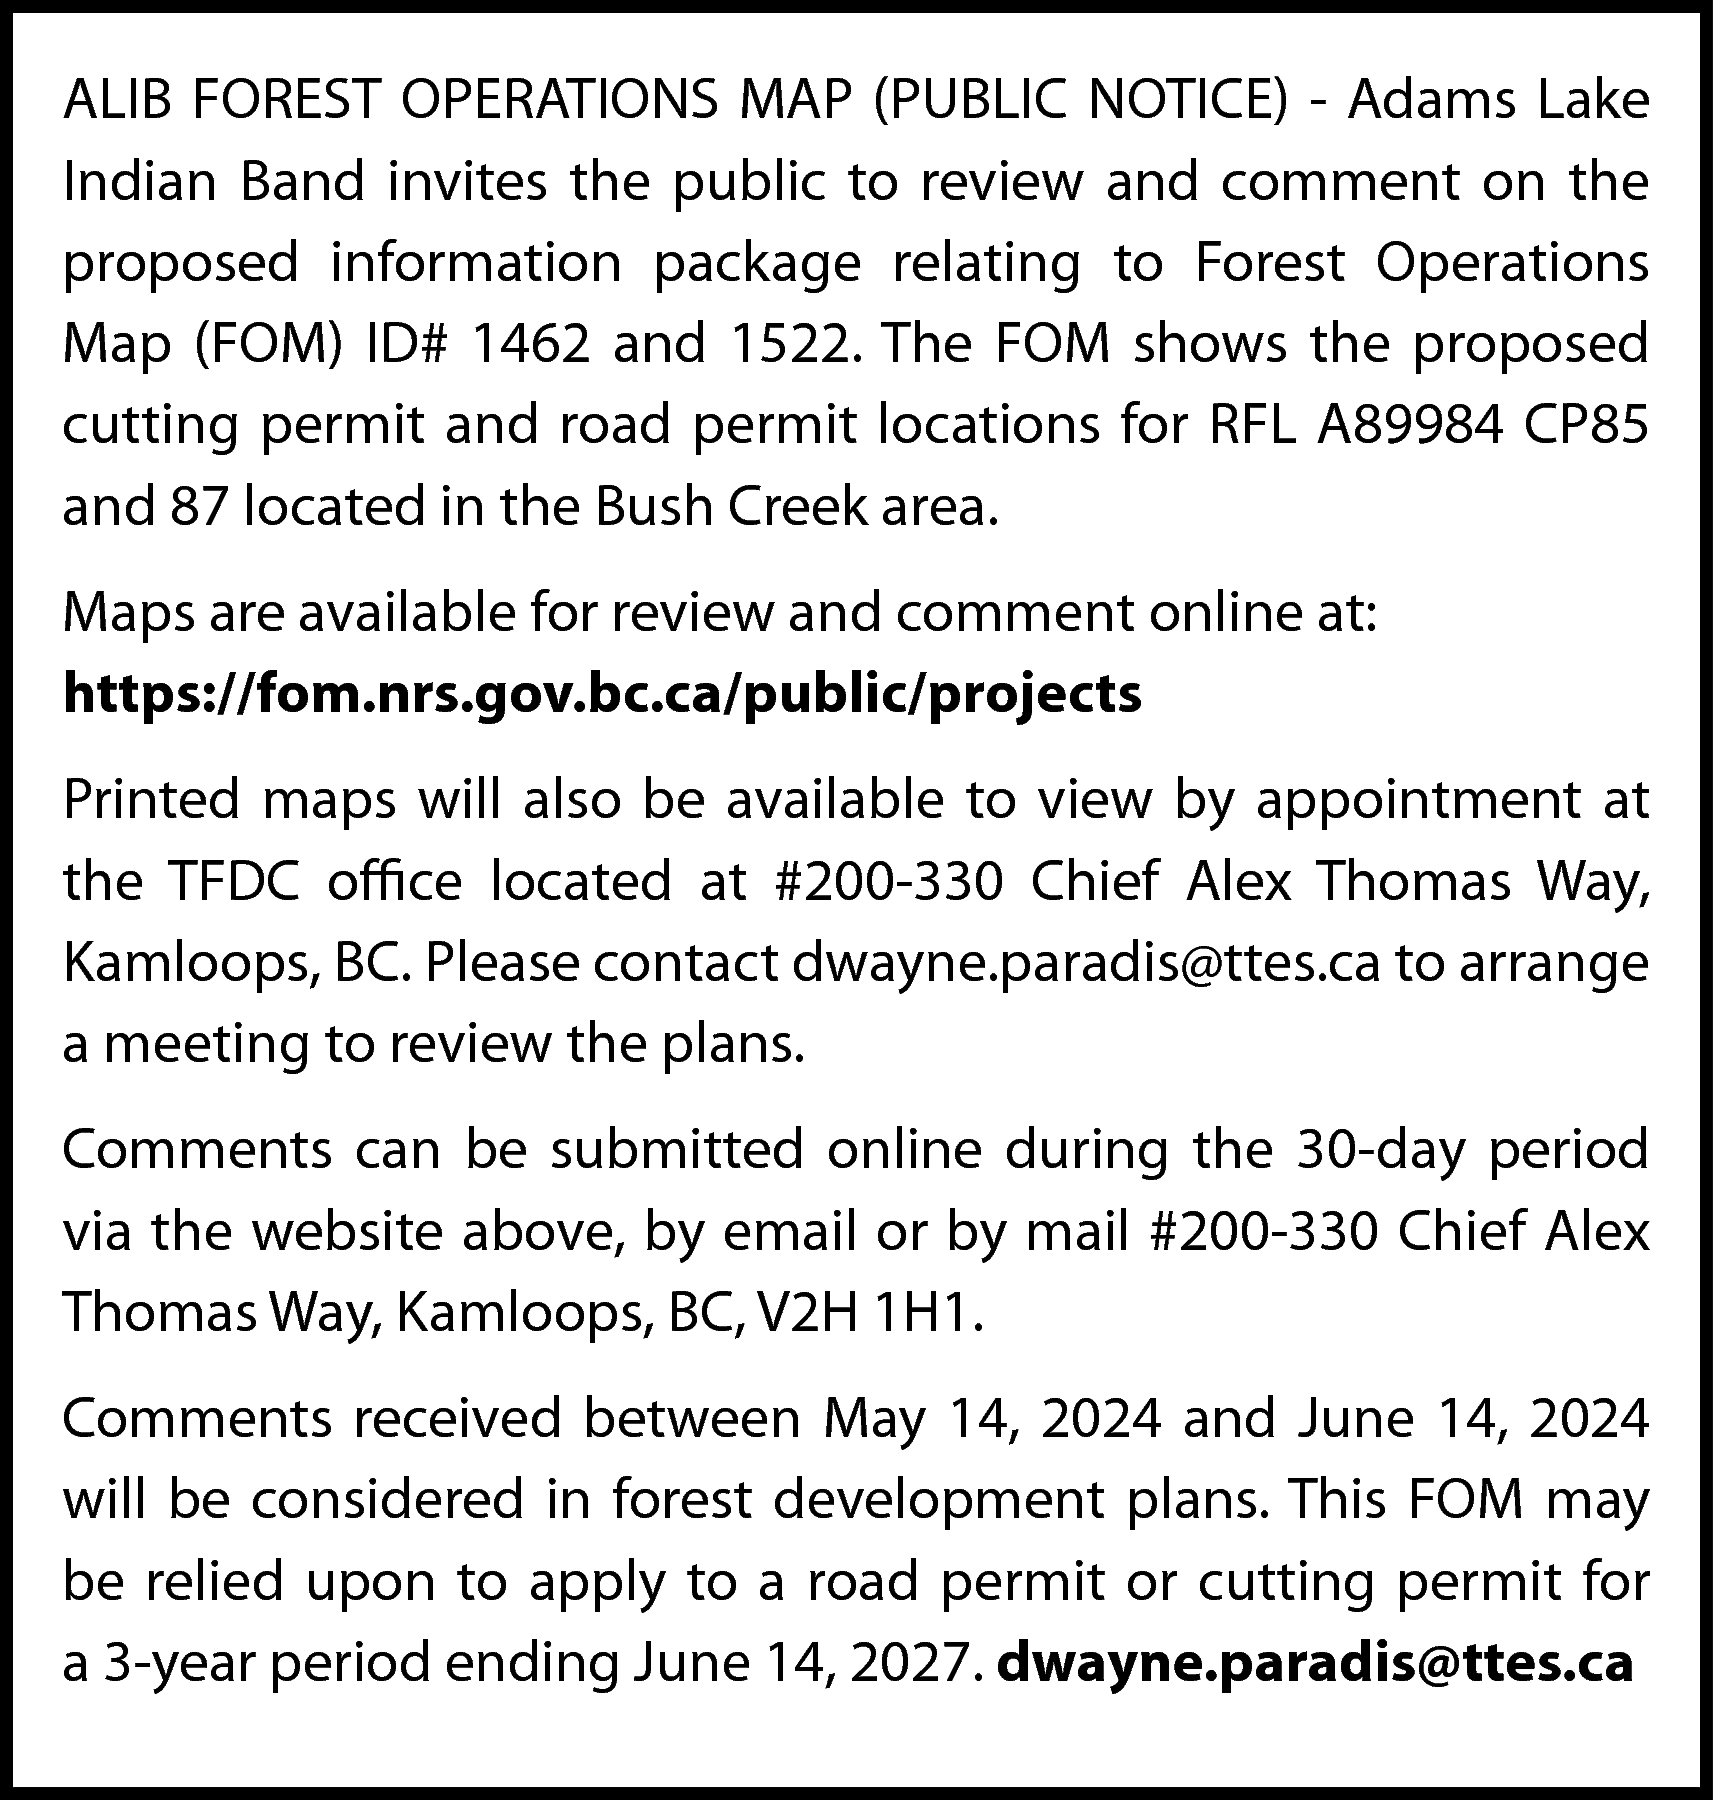 ALIB FOREST OPERATIONS MAP (PUBLIC  ALIB FOREST OPERATIONS MAP (PUBLIC NOTICE) - Adams Lake  Indian Band invites the public to review and comment on the  proposed information package relating to Forest Operations  Map (FOM) ID# 1462 and 1522. The FOM shows the proposed  cutting permit and road permit locations for RFL A89984 CP85  and 87 located in the Bush Creek area.  Maps are available for review and comment online at:  https://fom.nrs.gov.bc.ca/public/projects  Printed maps will also be available to view by appointment at  the TFDC office located at #200-330 Chief Alex Thomas Way,  Kamloops, BC. Please contact dwayne.paradis@ttes.ca to arrange  a meeting to review the plans.  Comments can be submitted online during the 30-day period  via the website above, by email or by mail #200-330 Chief Alex  Thomas Way, Kamloops, BC, V2H 1H1.  Comments received between May 14, 2024 and June 14, 2024  will be considered in forest development plans. This FOM may  be relied upon to apply to a road permit or cutting permit for  a 3-year period ending June 14, 2027. dwayne.paradis@ttes.ca    